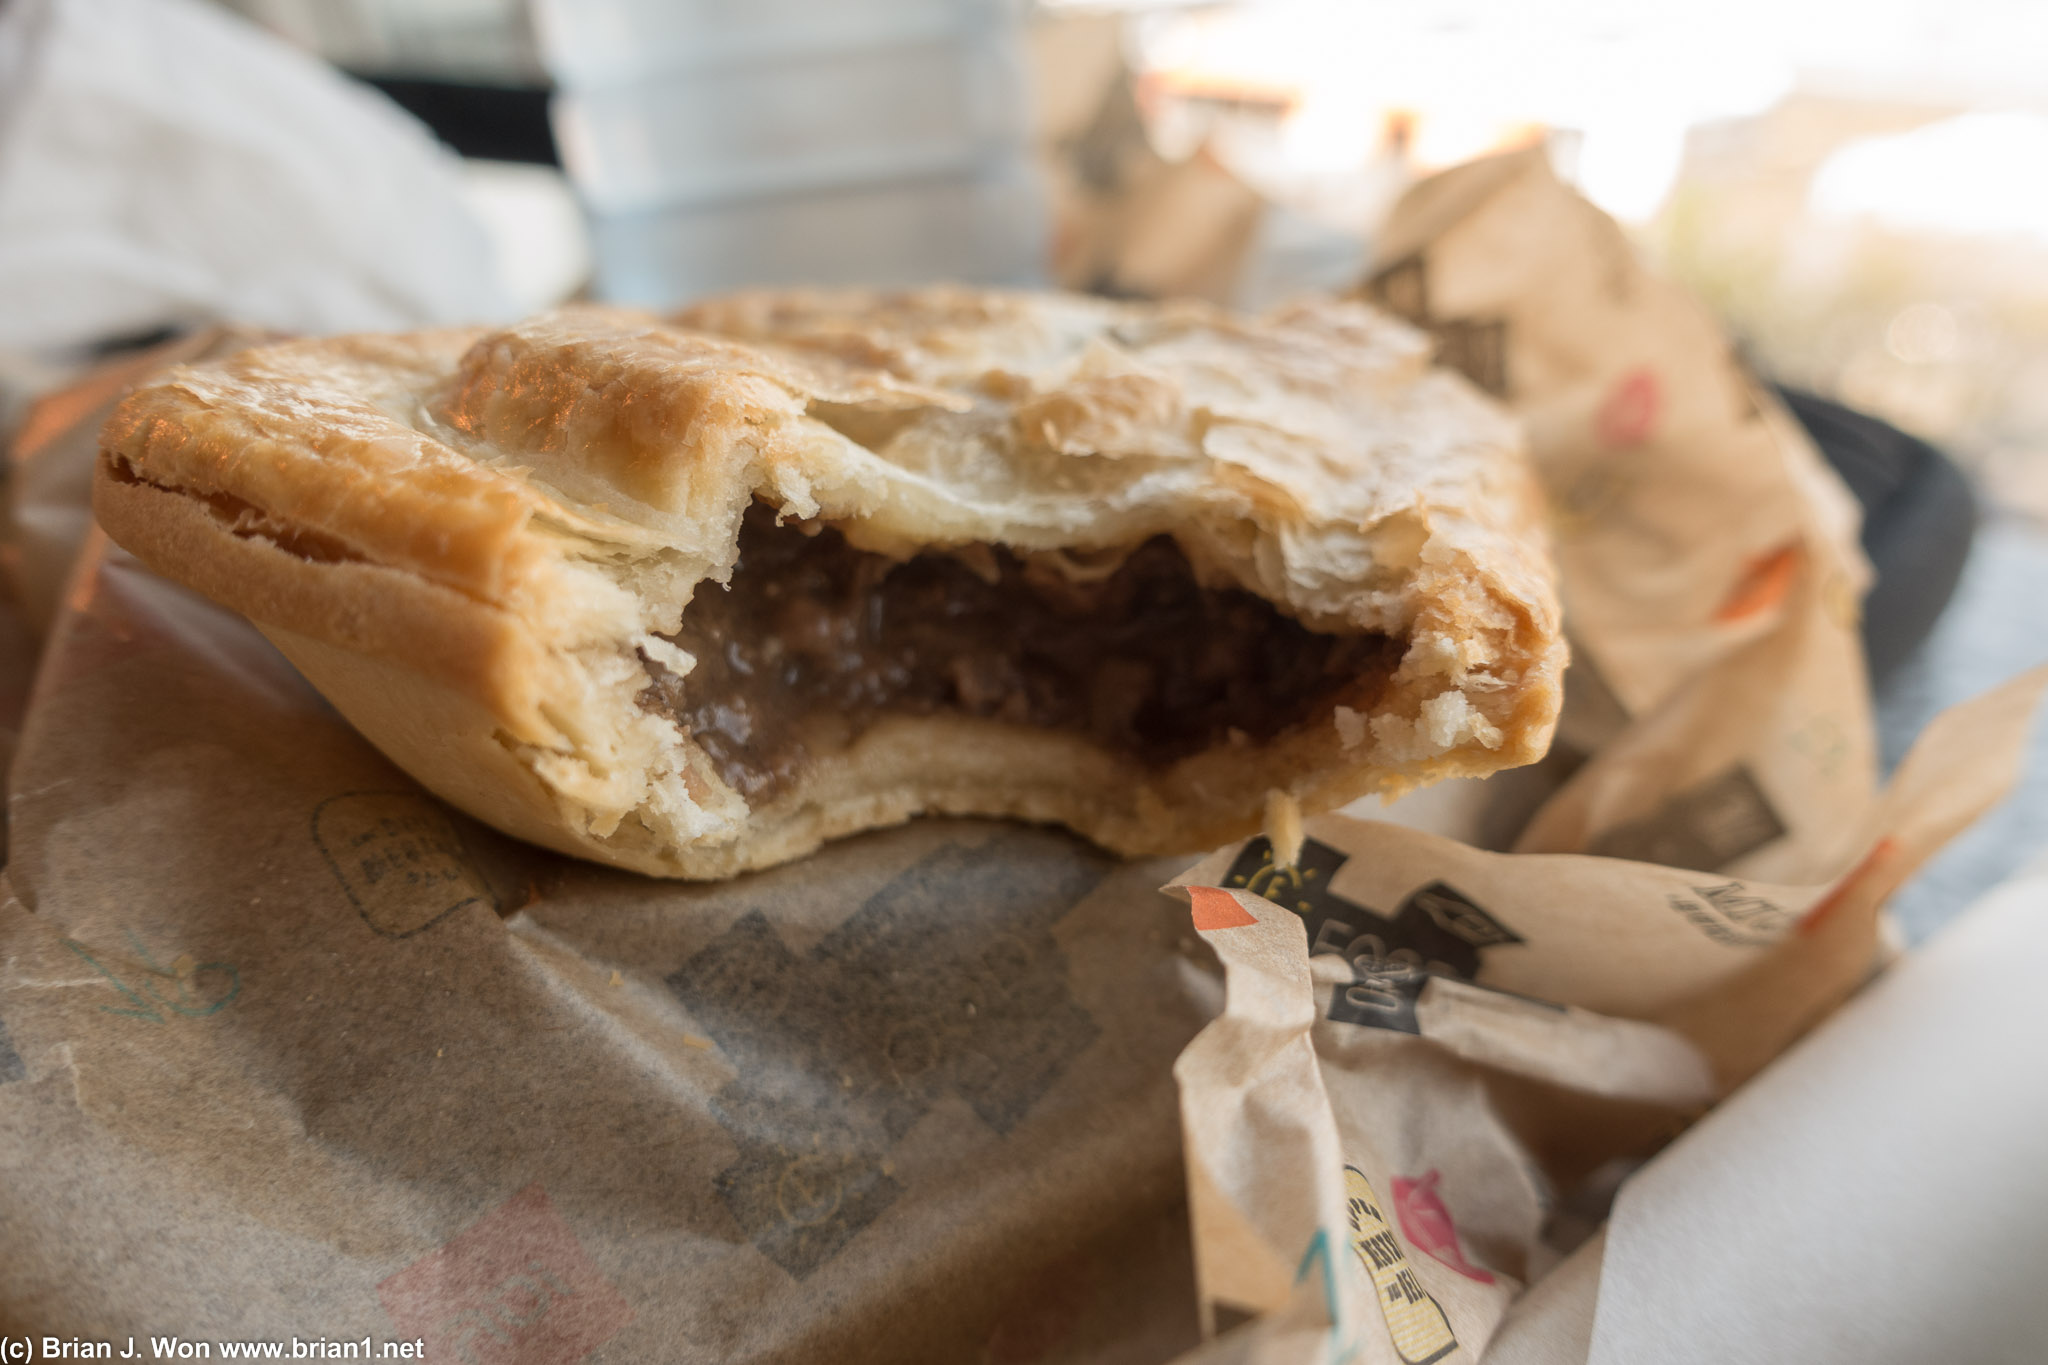 Meat pie was actually kind of sad.